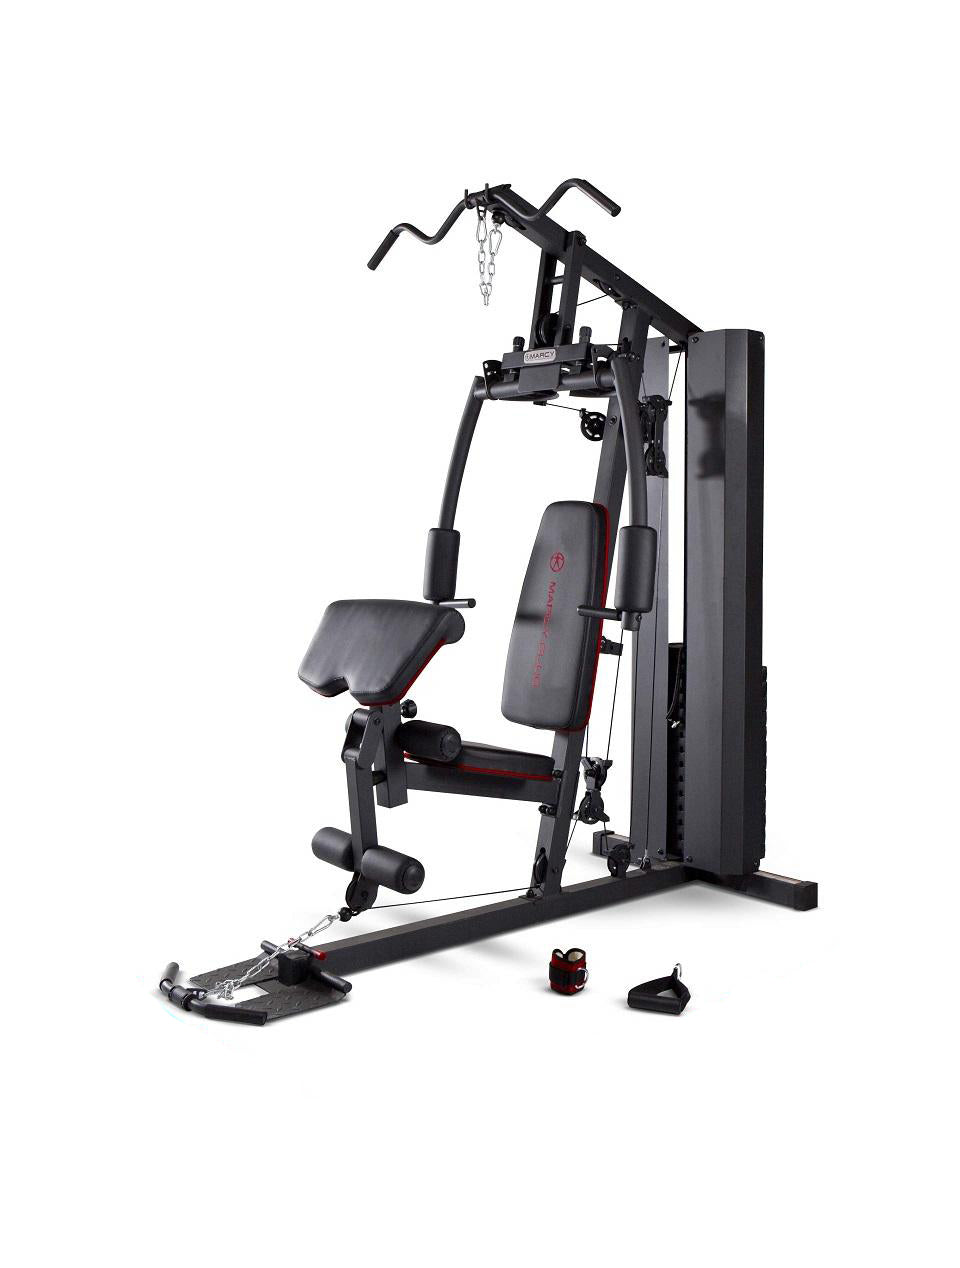 Marcy USA Dual Function Home Gym 200 LB Weight Stack - MKM-81010